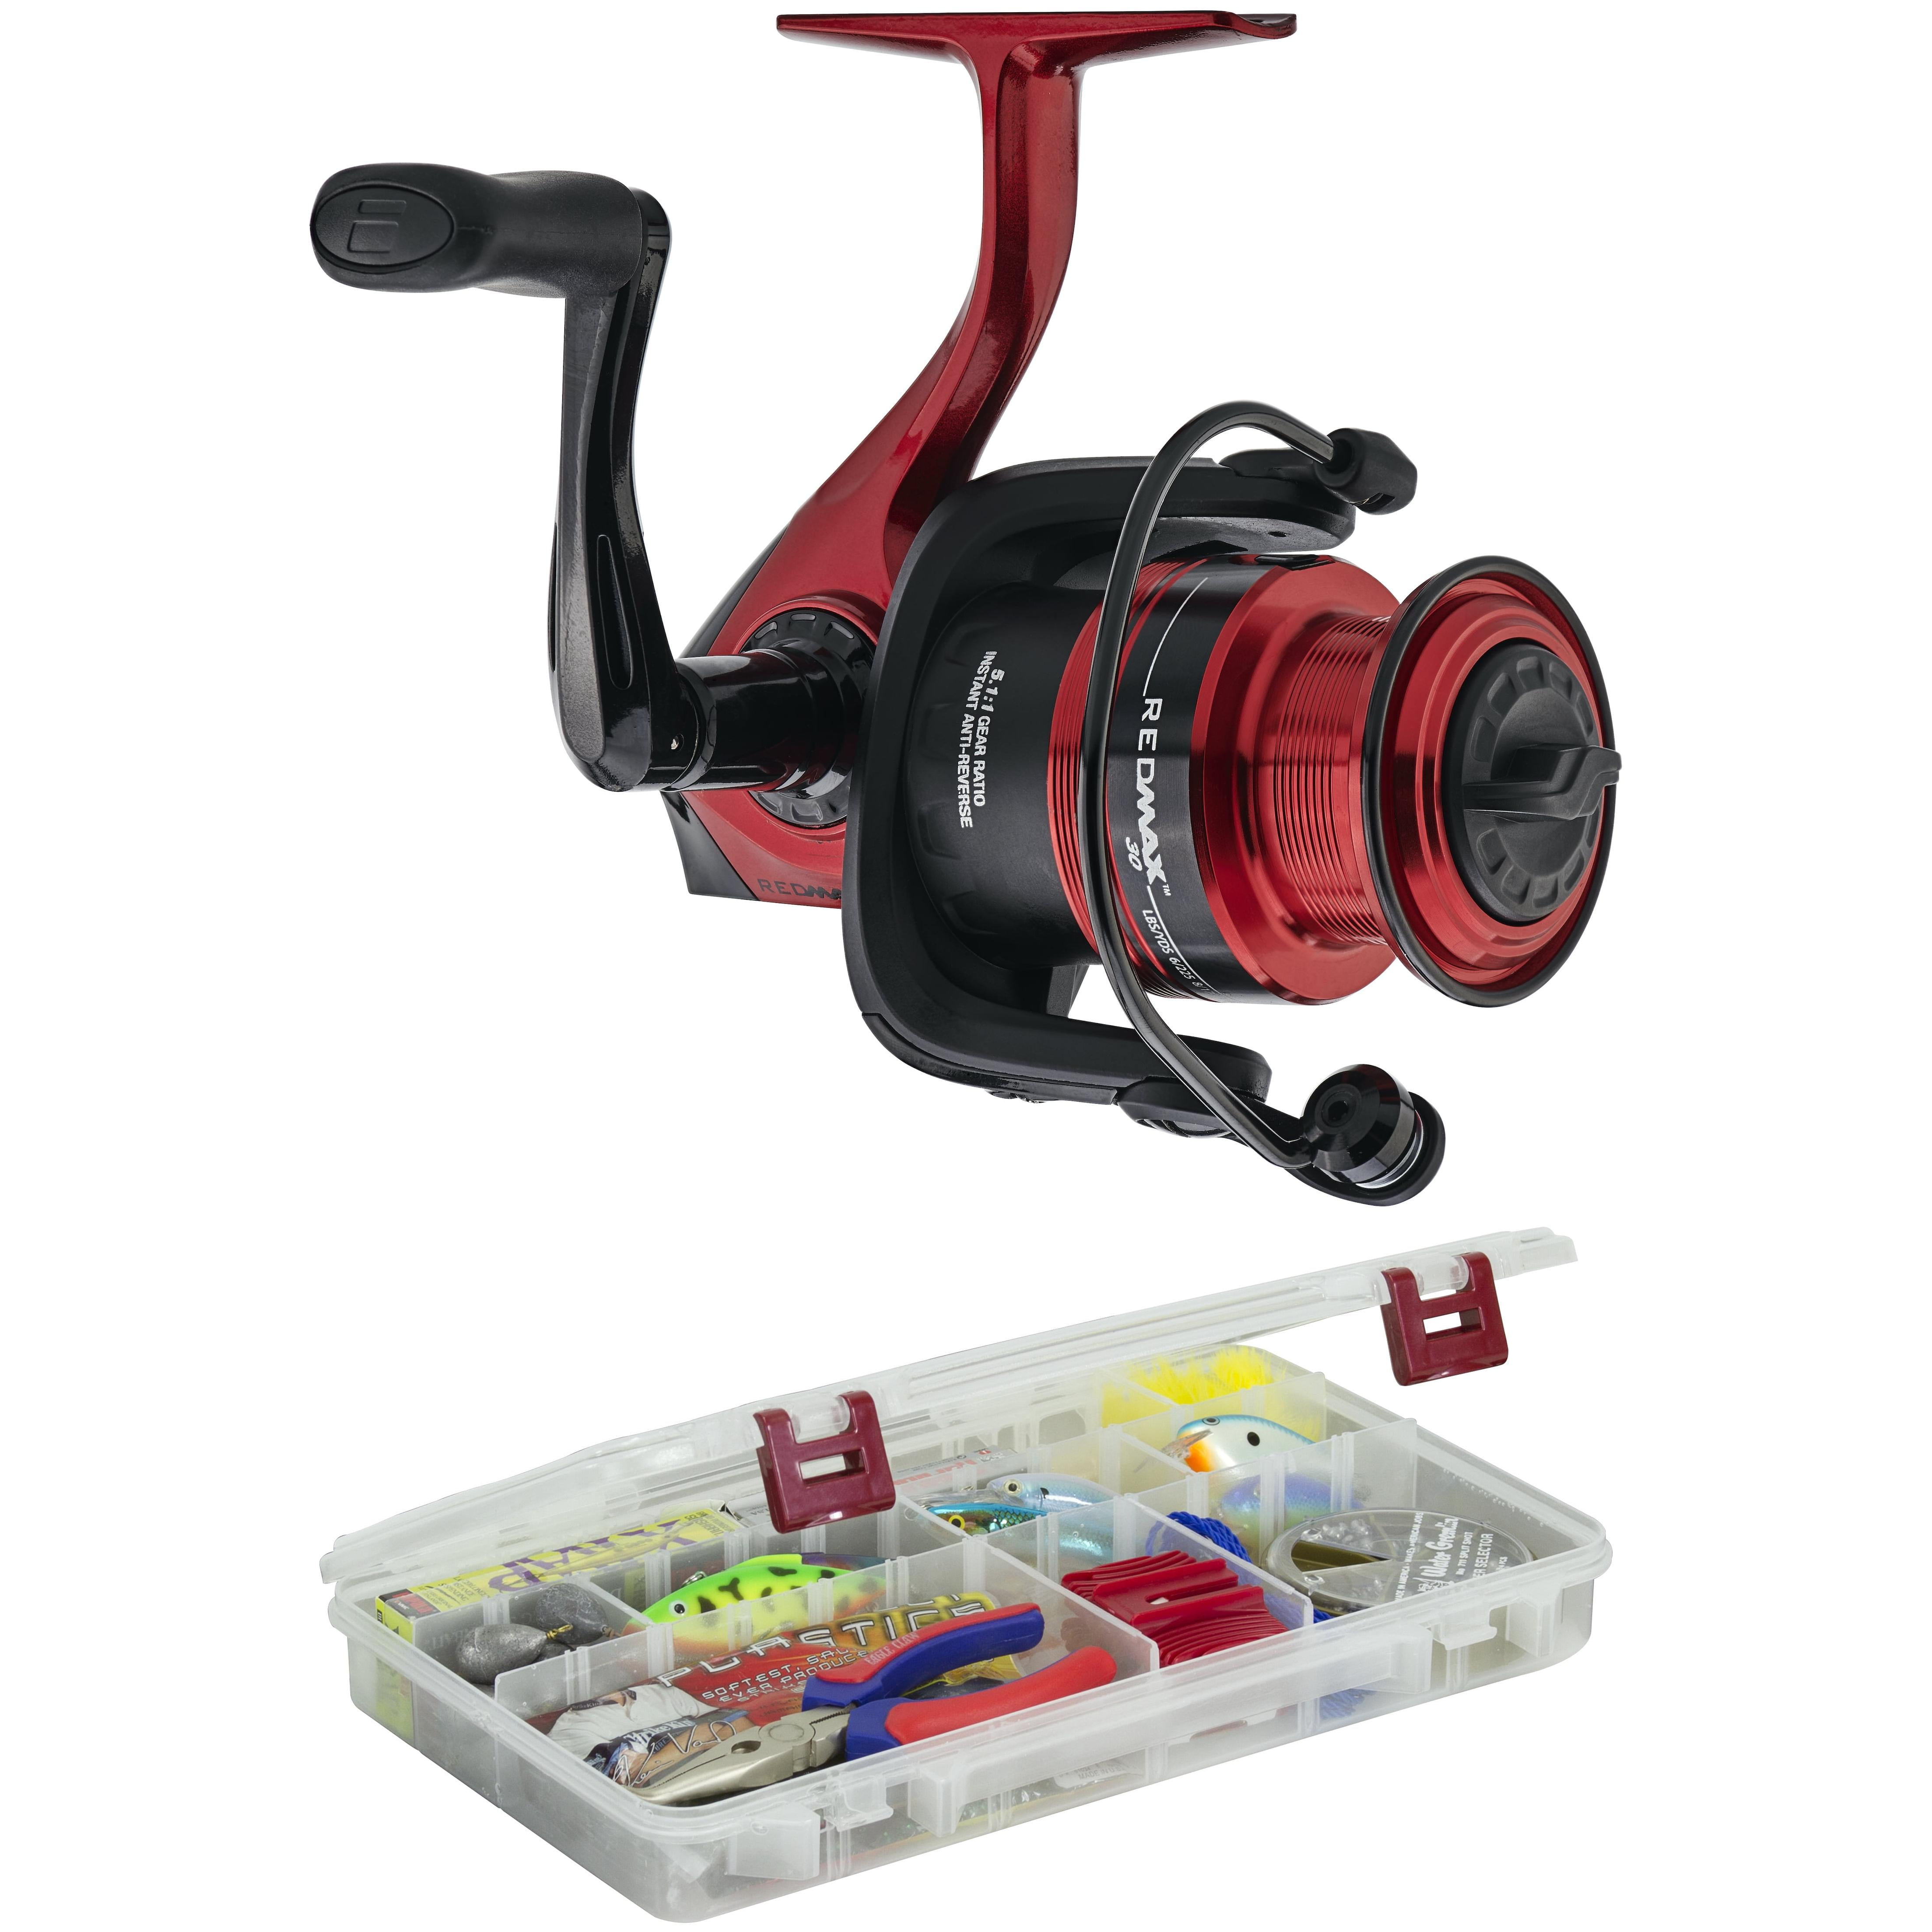 Abu Garcia Red Max Spinning Fishing Reel with a Plano ProLatch